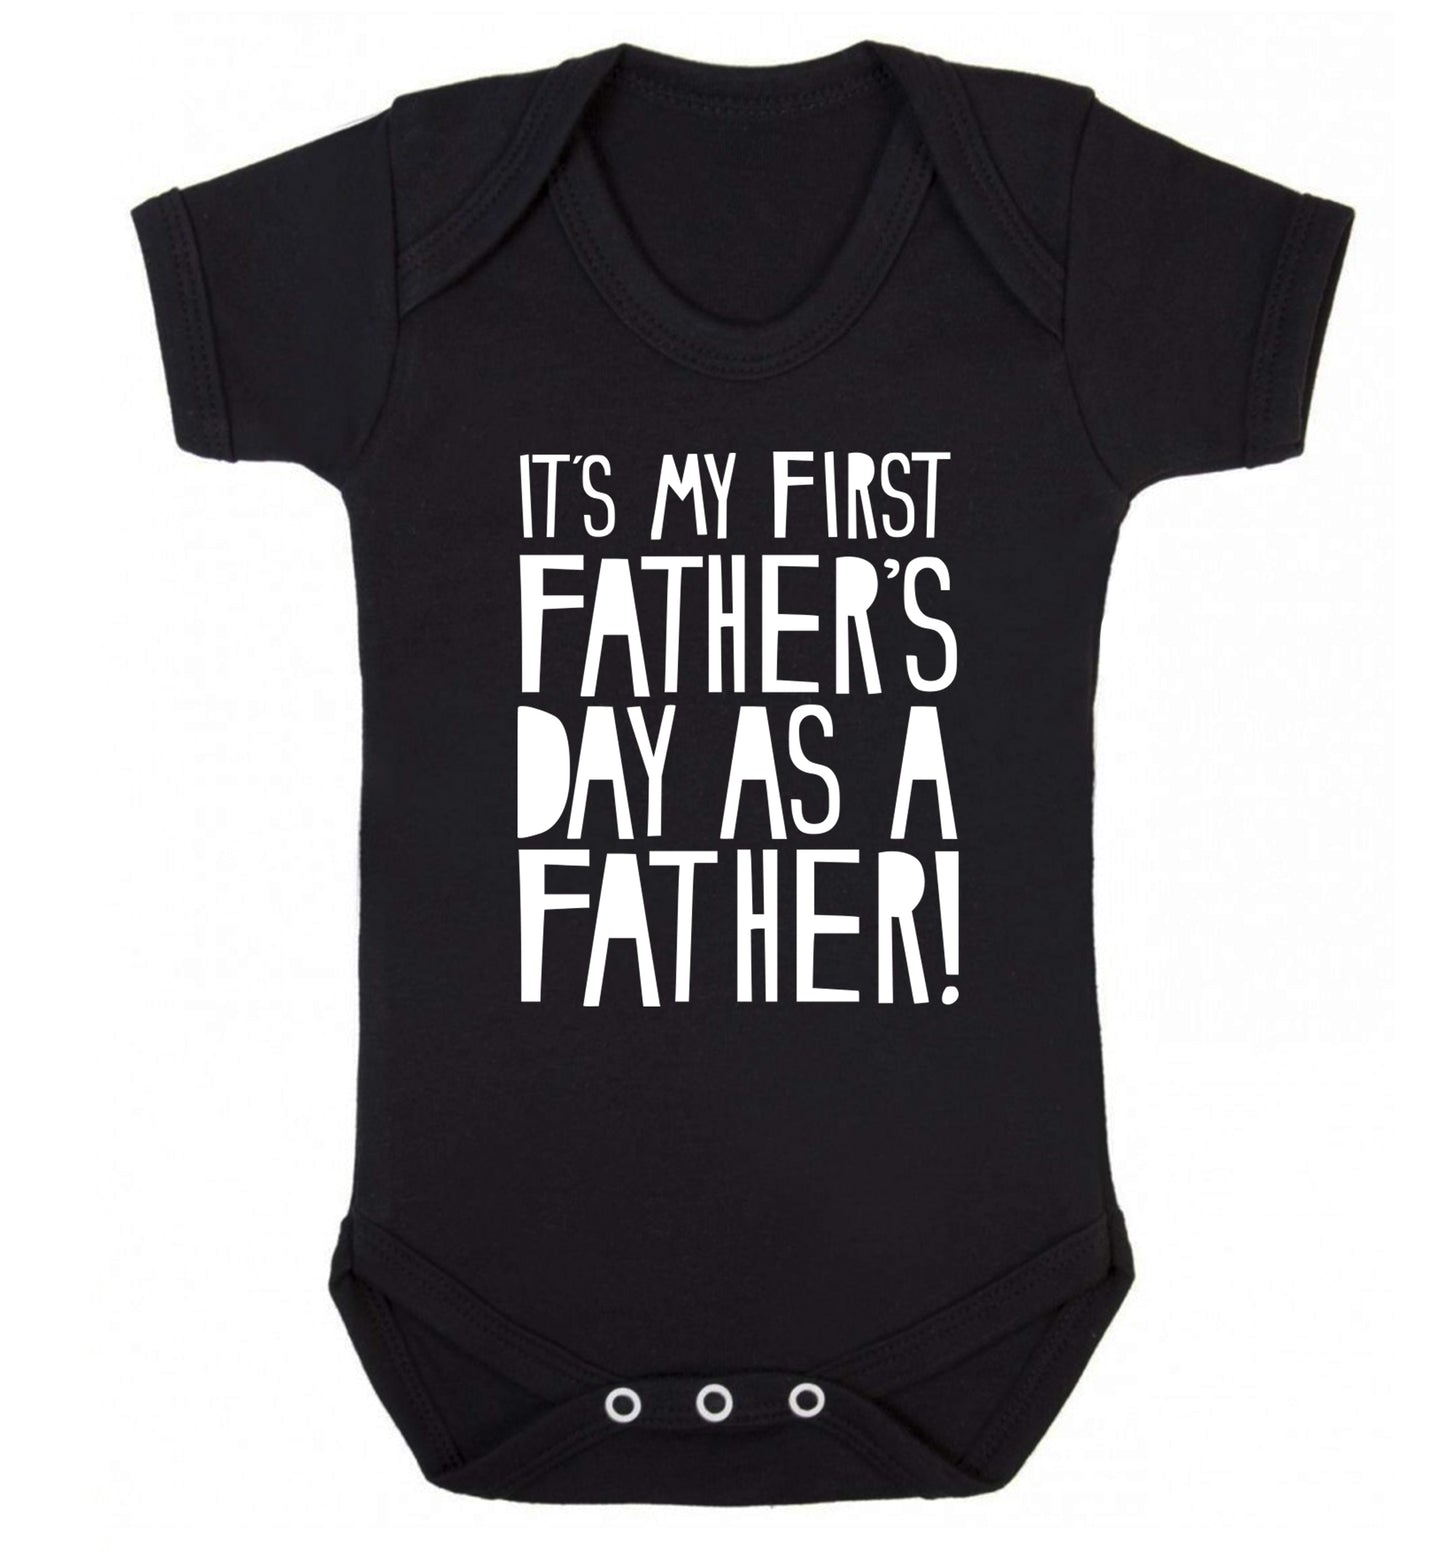 It's my first Father's Day as a father! Baby Vest black 18-24 months